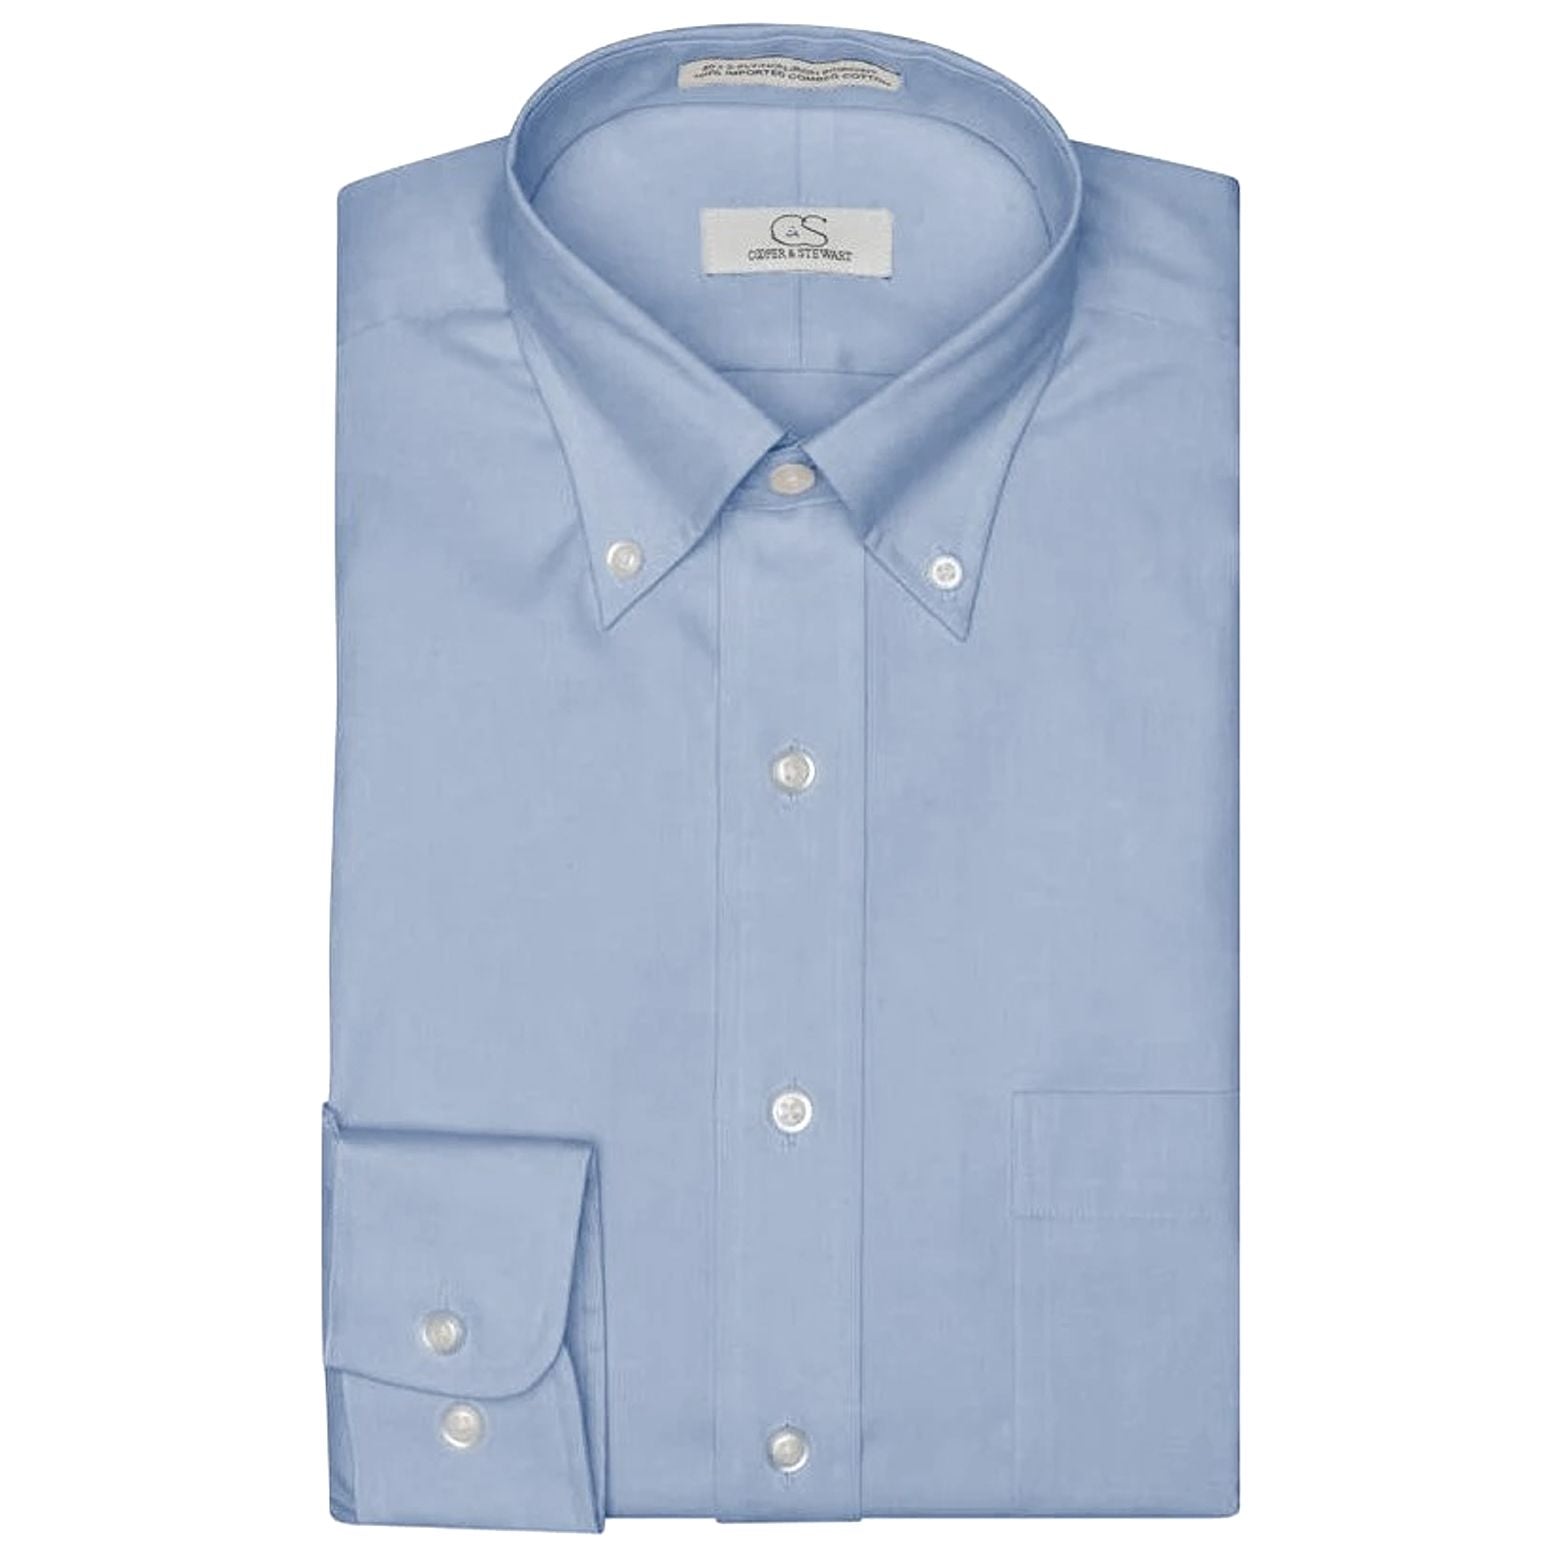 The Standard Blue - Wrinkle-Free Pinpoint Oxford Cotton Dress Shirt with Button-Down Collar by Cooper & Stewart